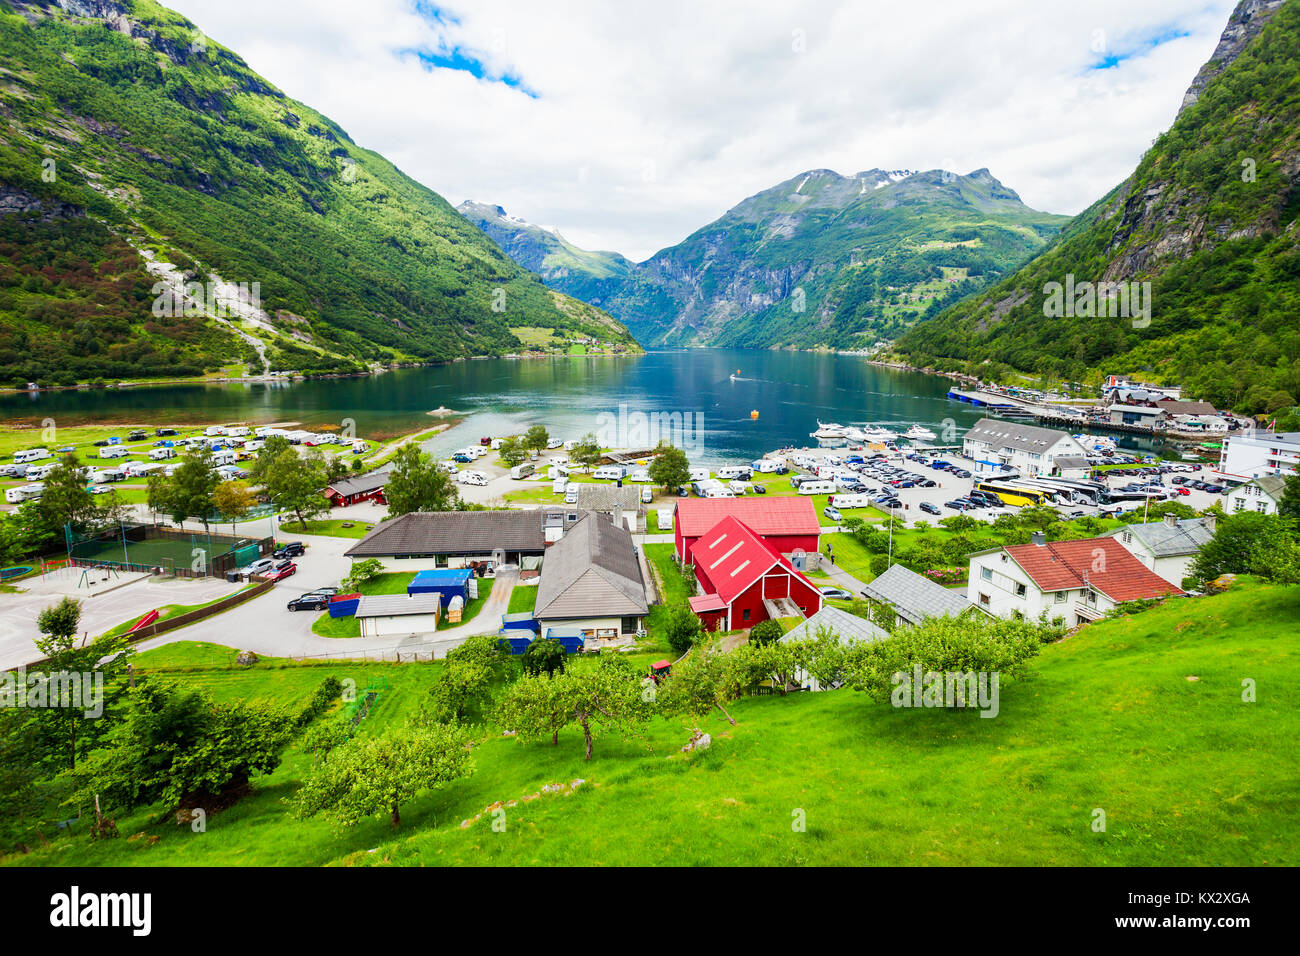 Geiranger is a small tourist village in Sunnmore region of Norway. Geiranger lies at the Geirangerfjord. Stock Photo